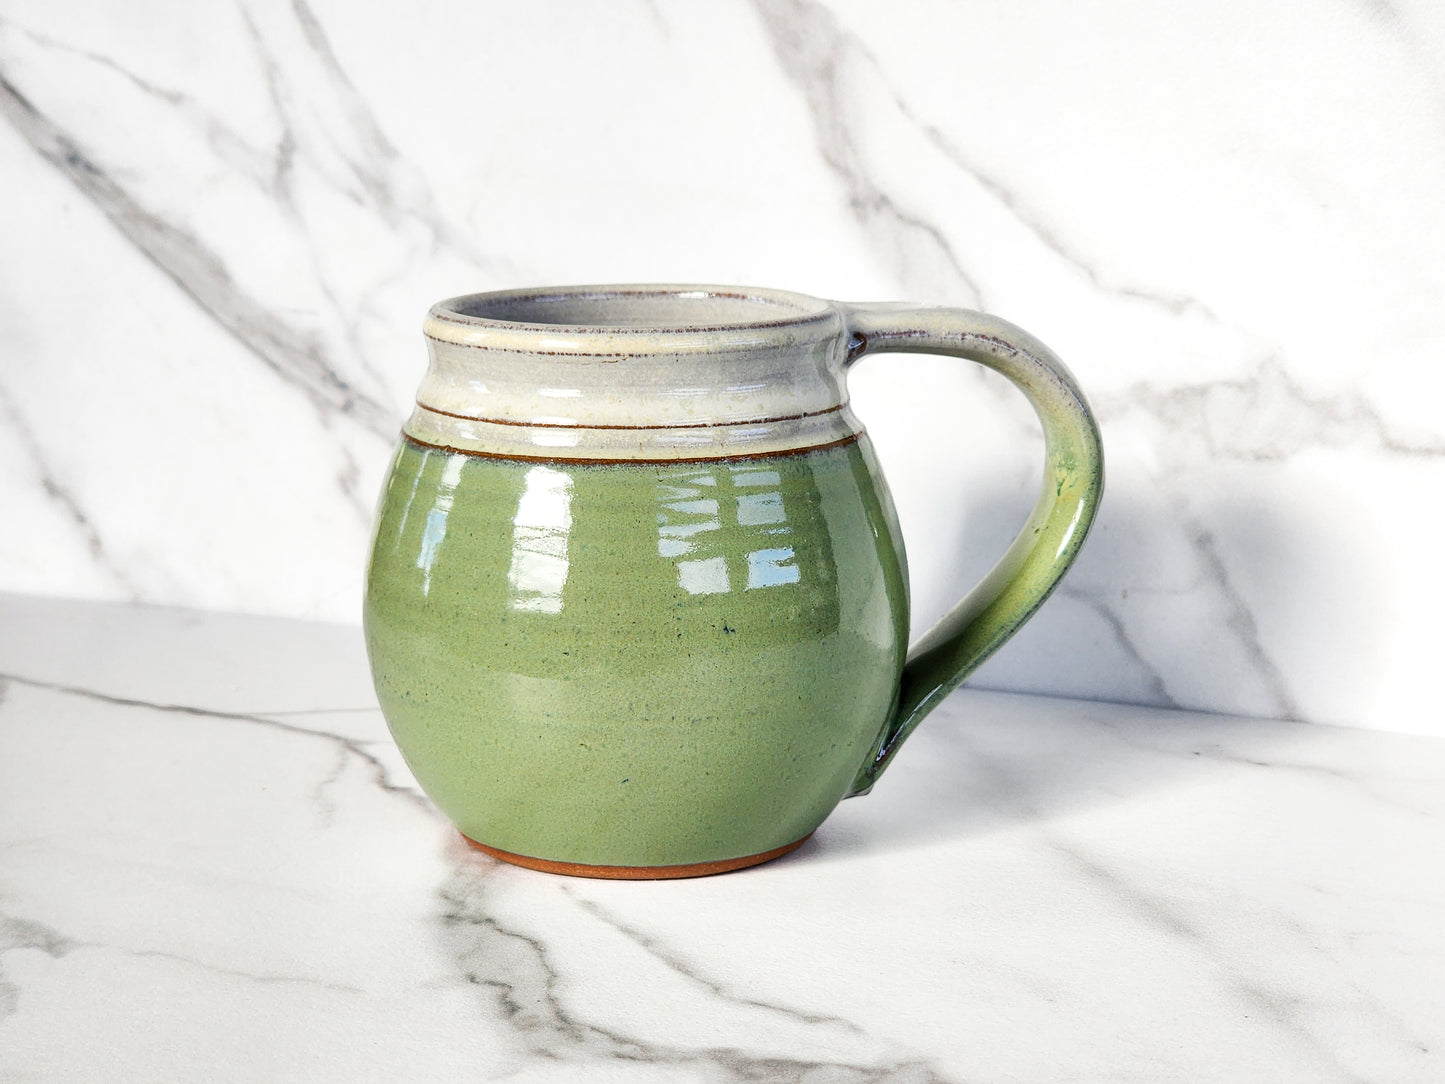  Add a touch of nature to your morning routine with the Bud Green medium mug by Clinton Pottery. Crafted with care, this stylish mug is perfect for enjoying your favorite hot beverages in style.